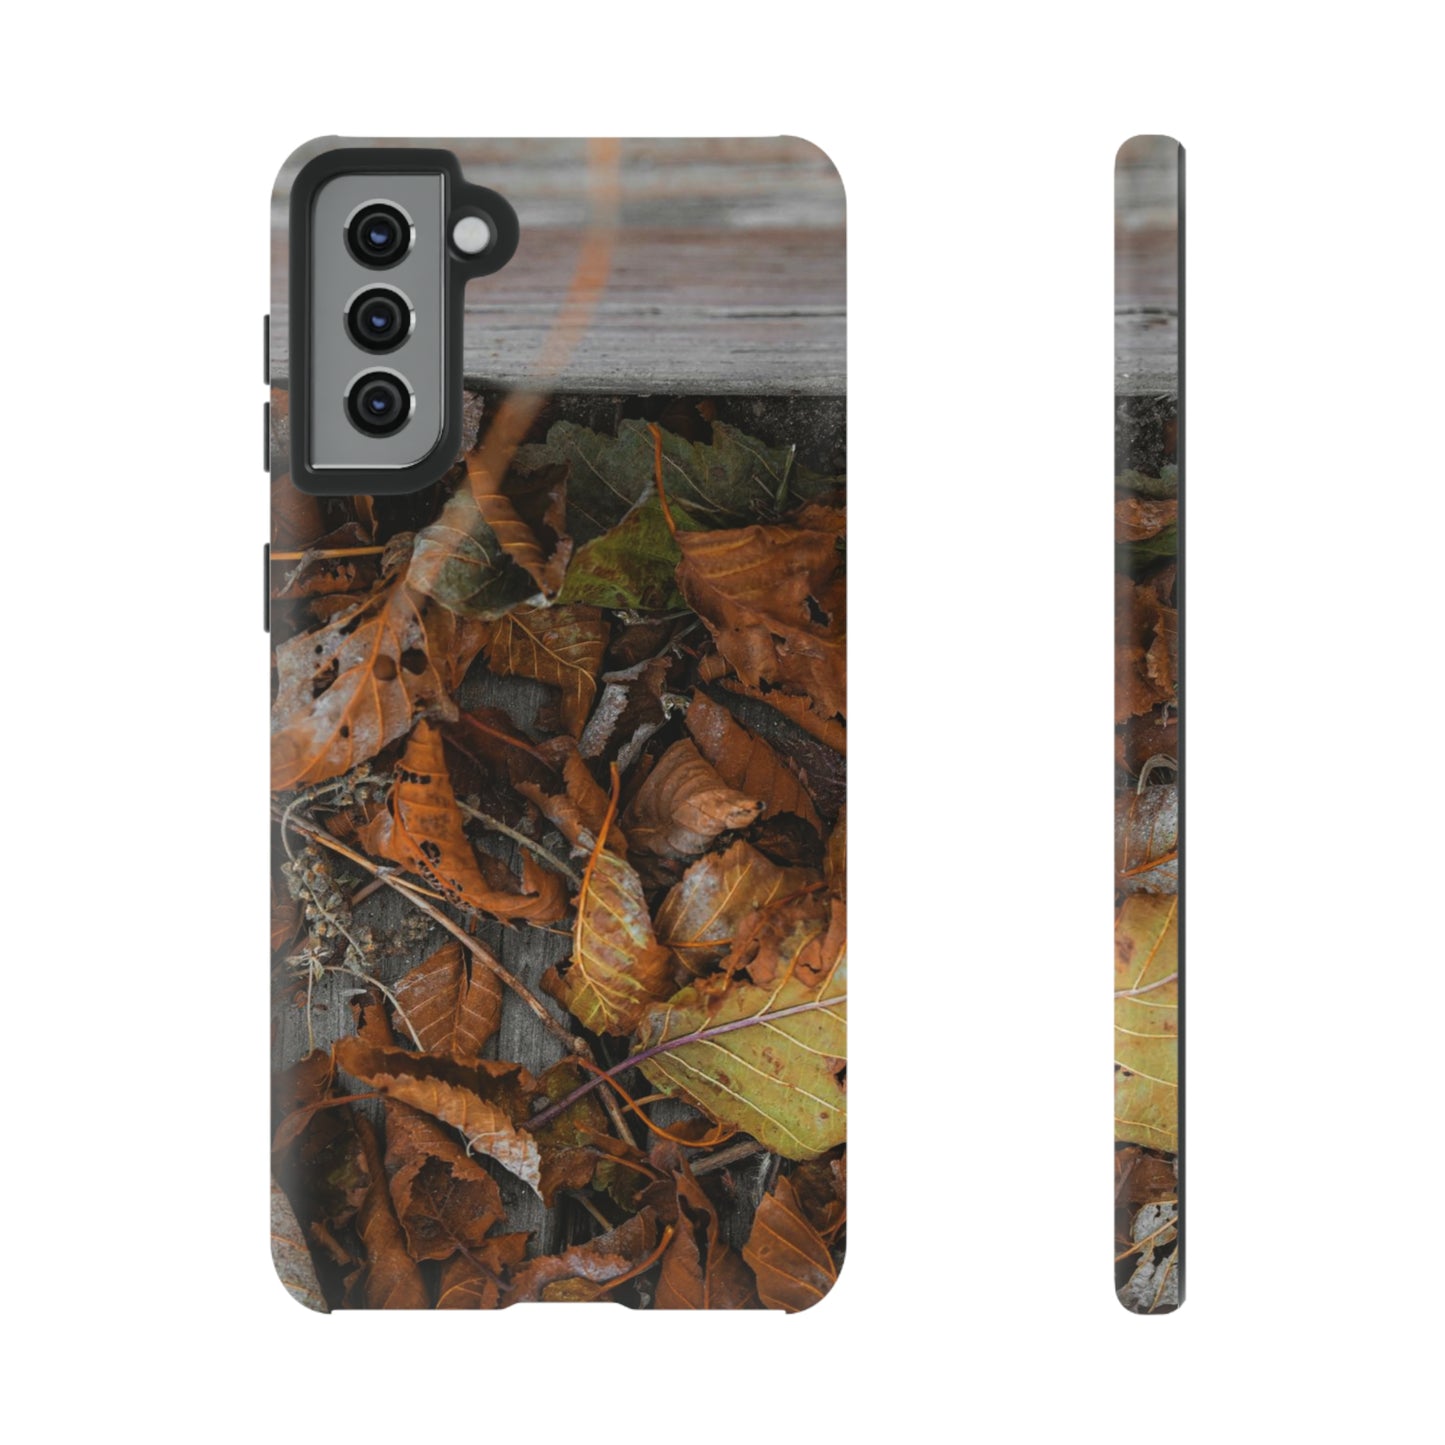 "The Leaves" Tough Cases